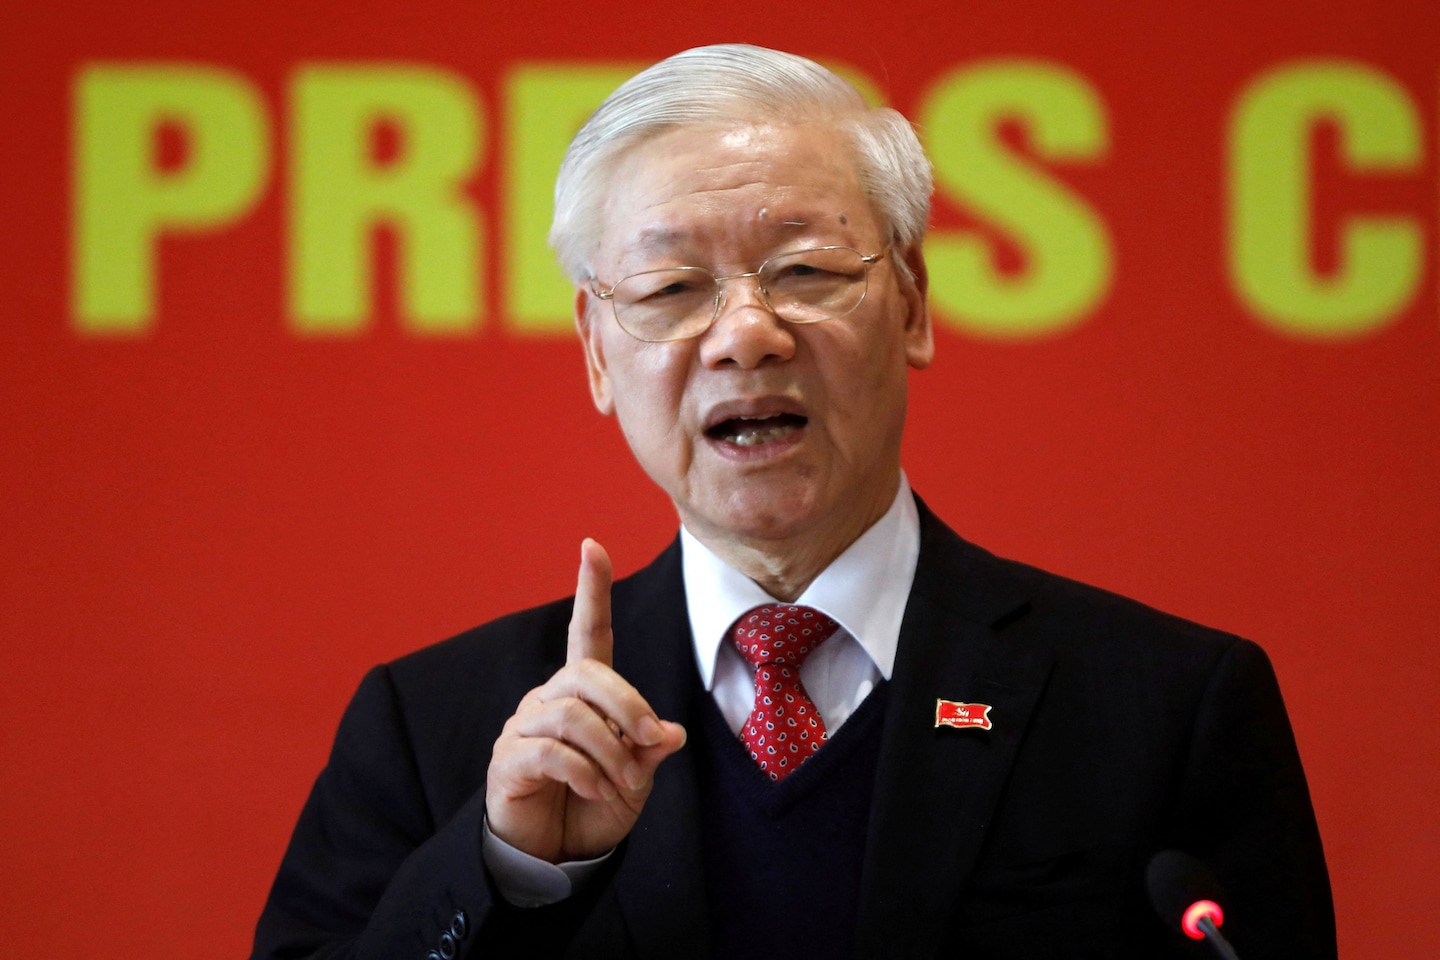 Nguyen Phu Trong steps back from Vietnam leadership due to health